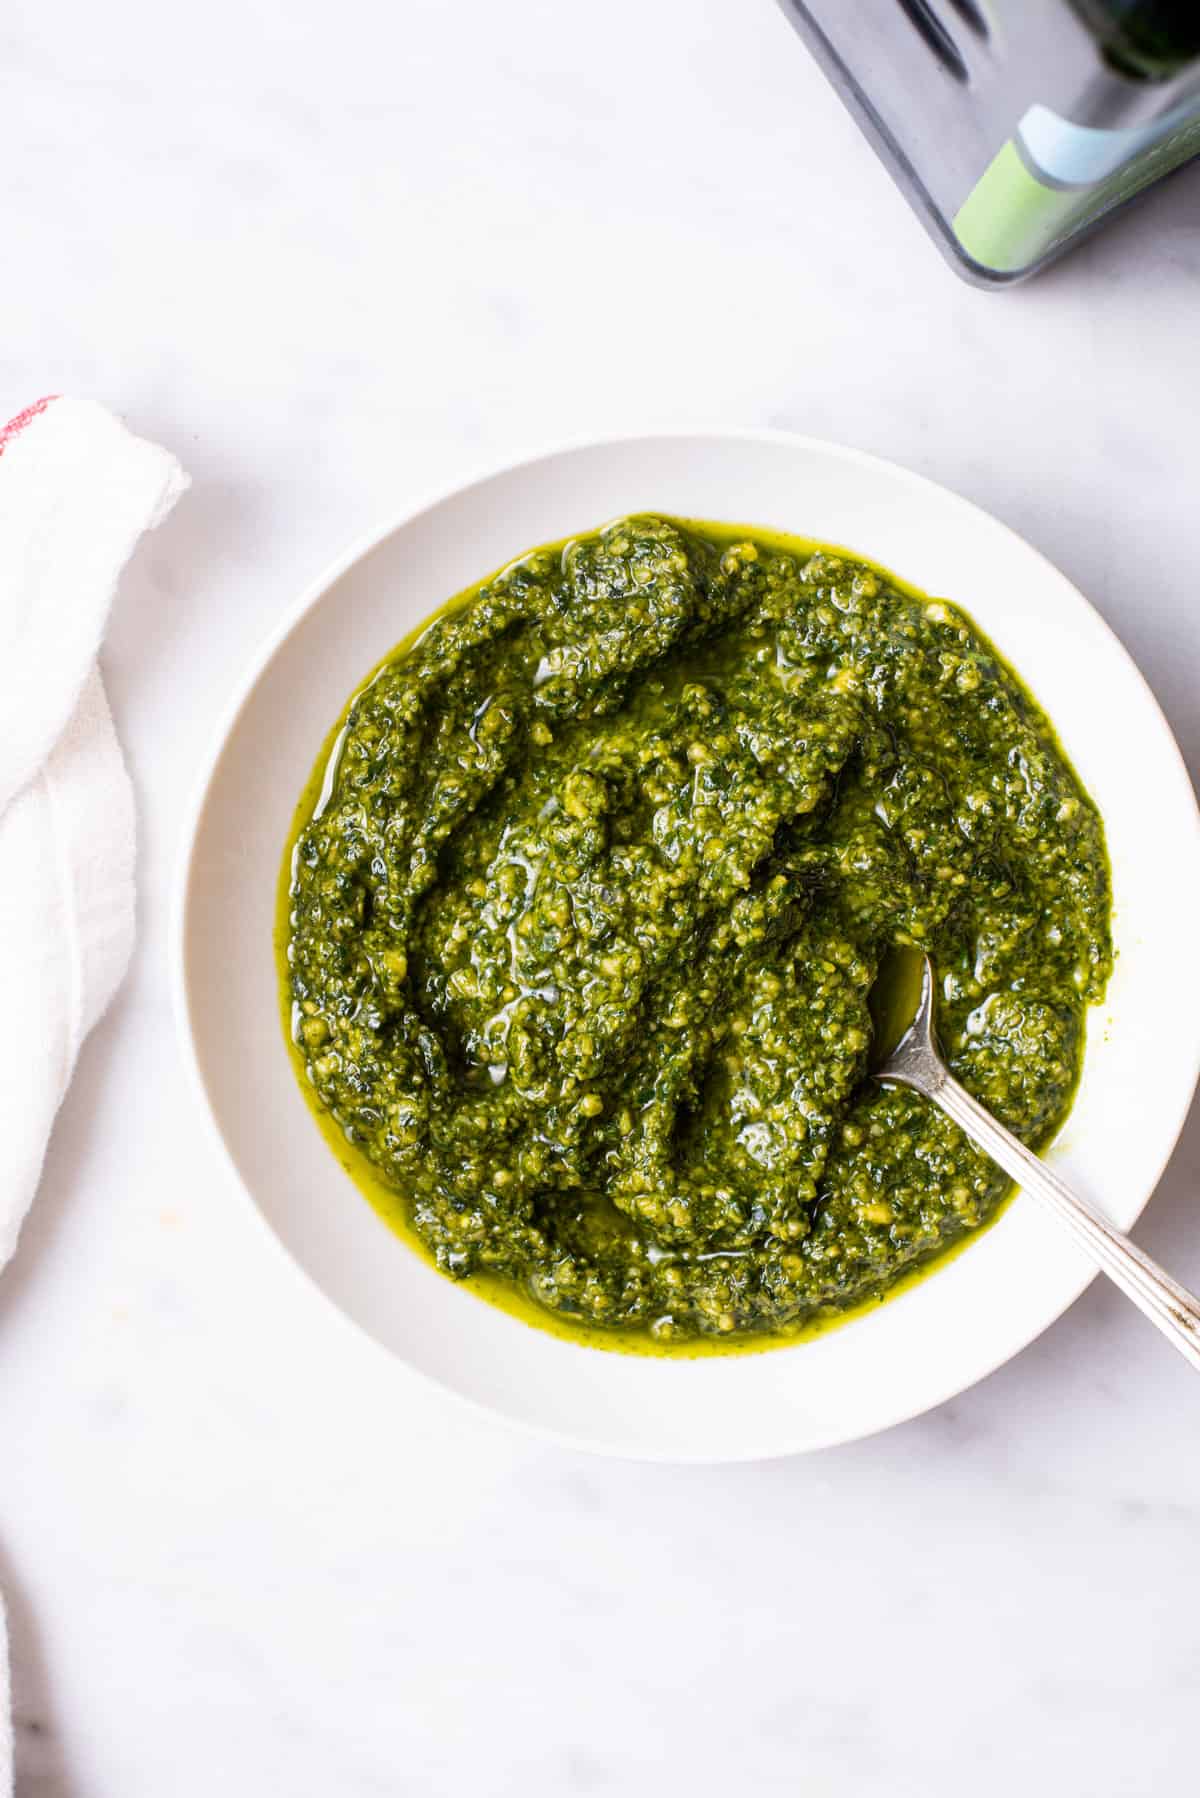 Homemade dairy-free pesto in a white bowl on a marble table.